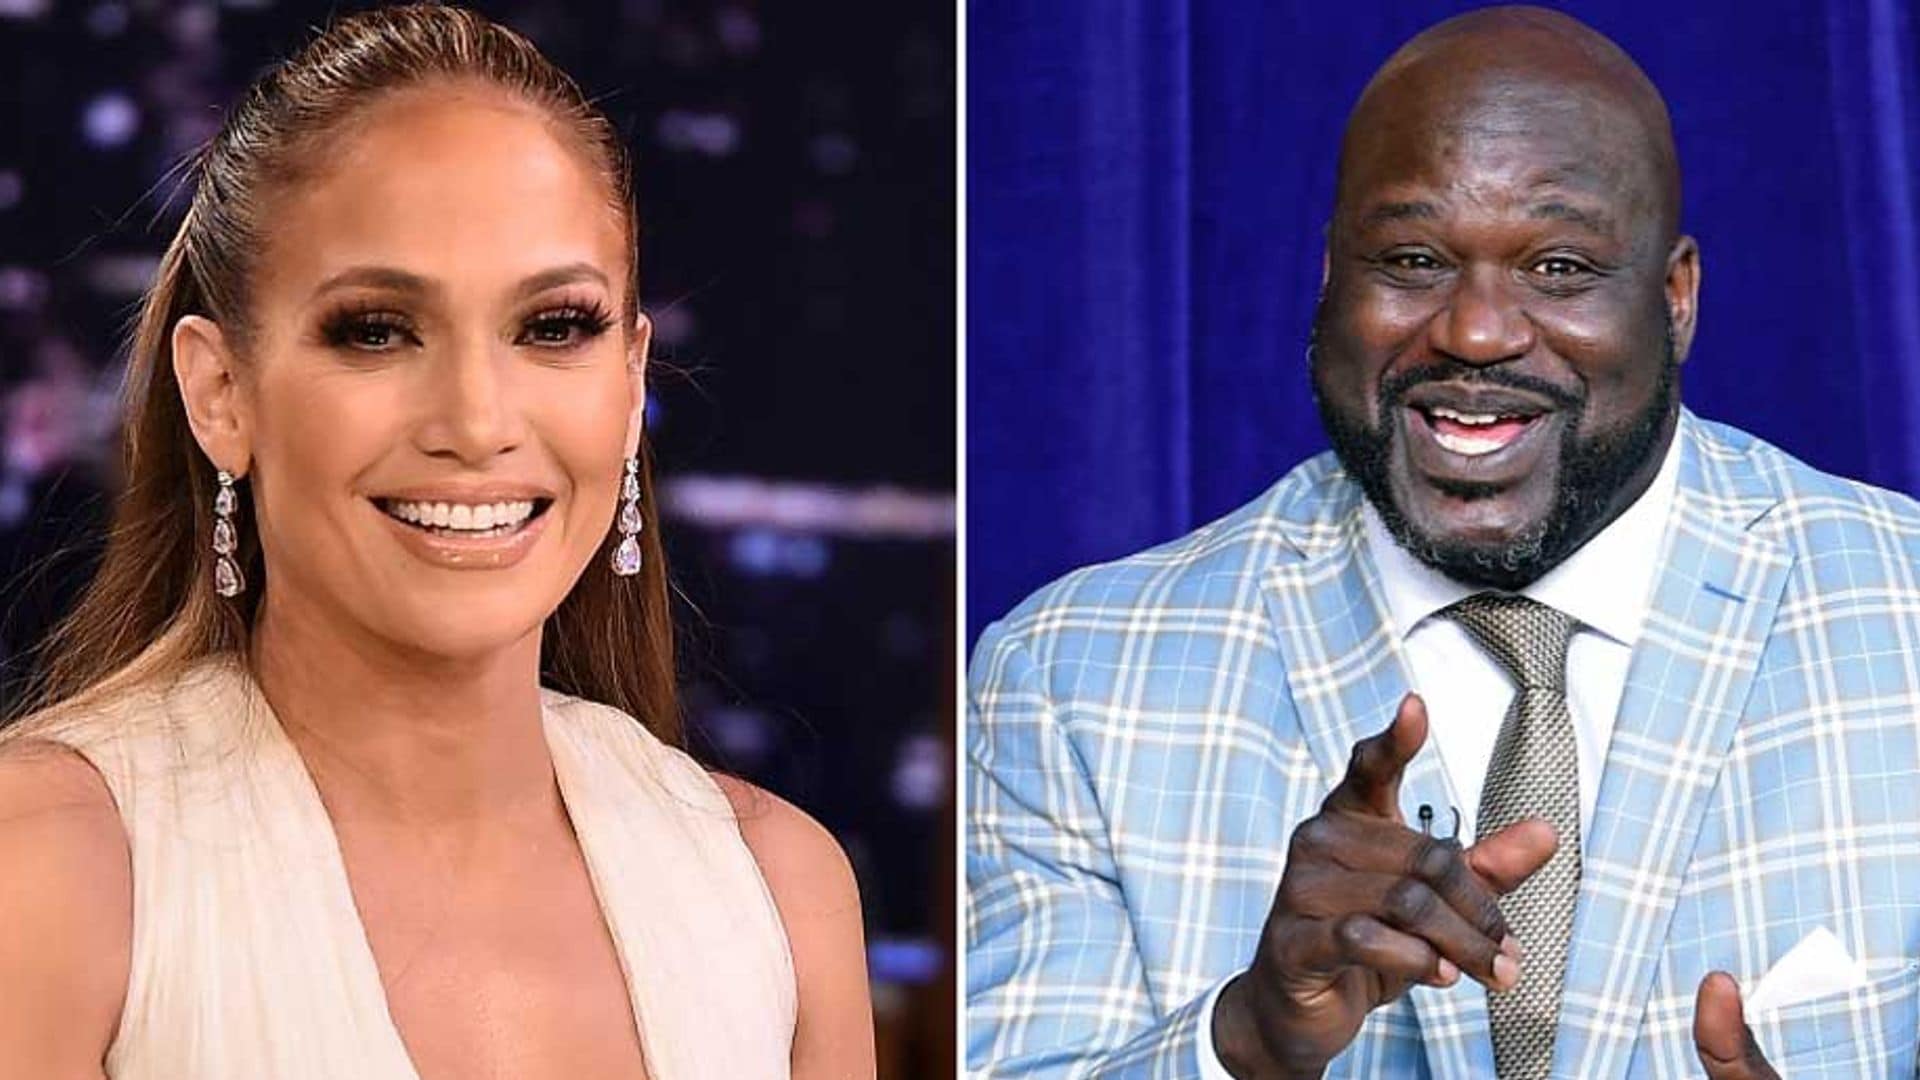 Jennifer Lopez and Shaquille O'Neal Instagram